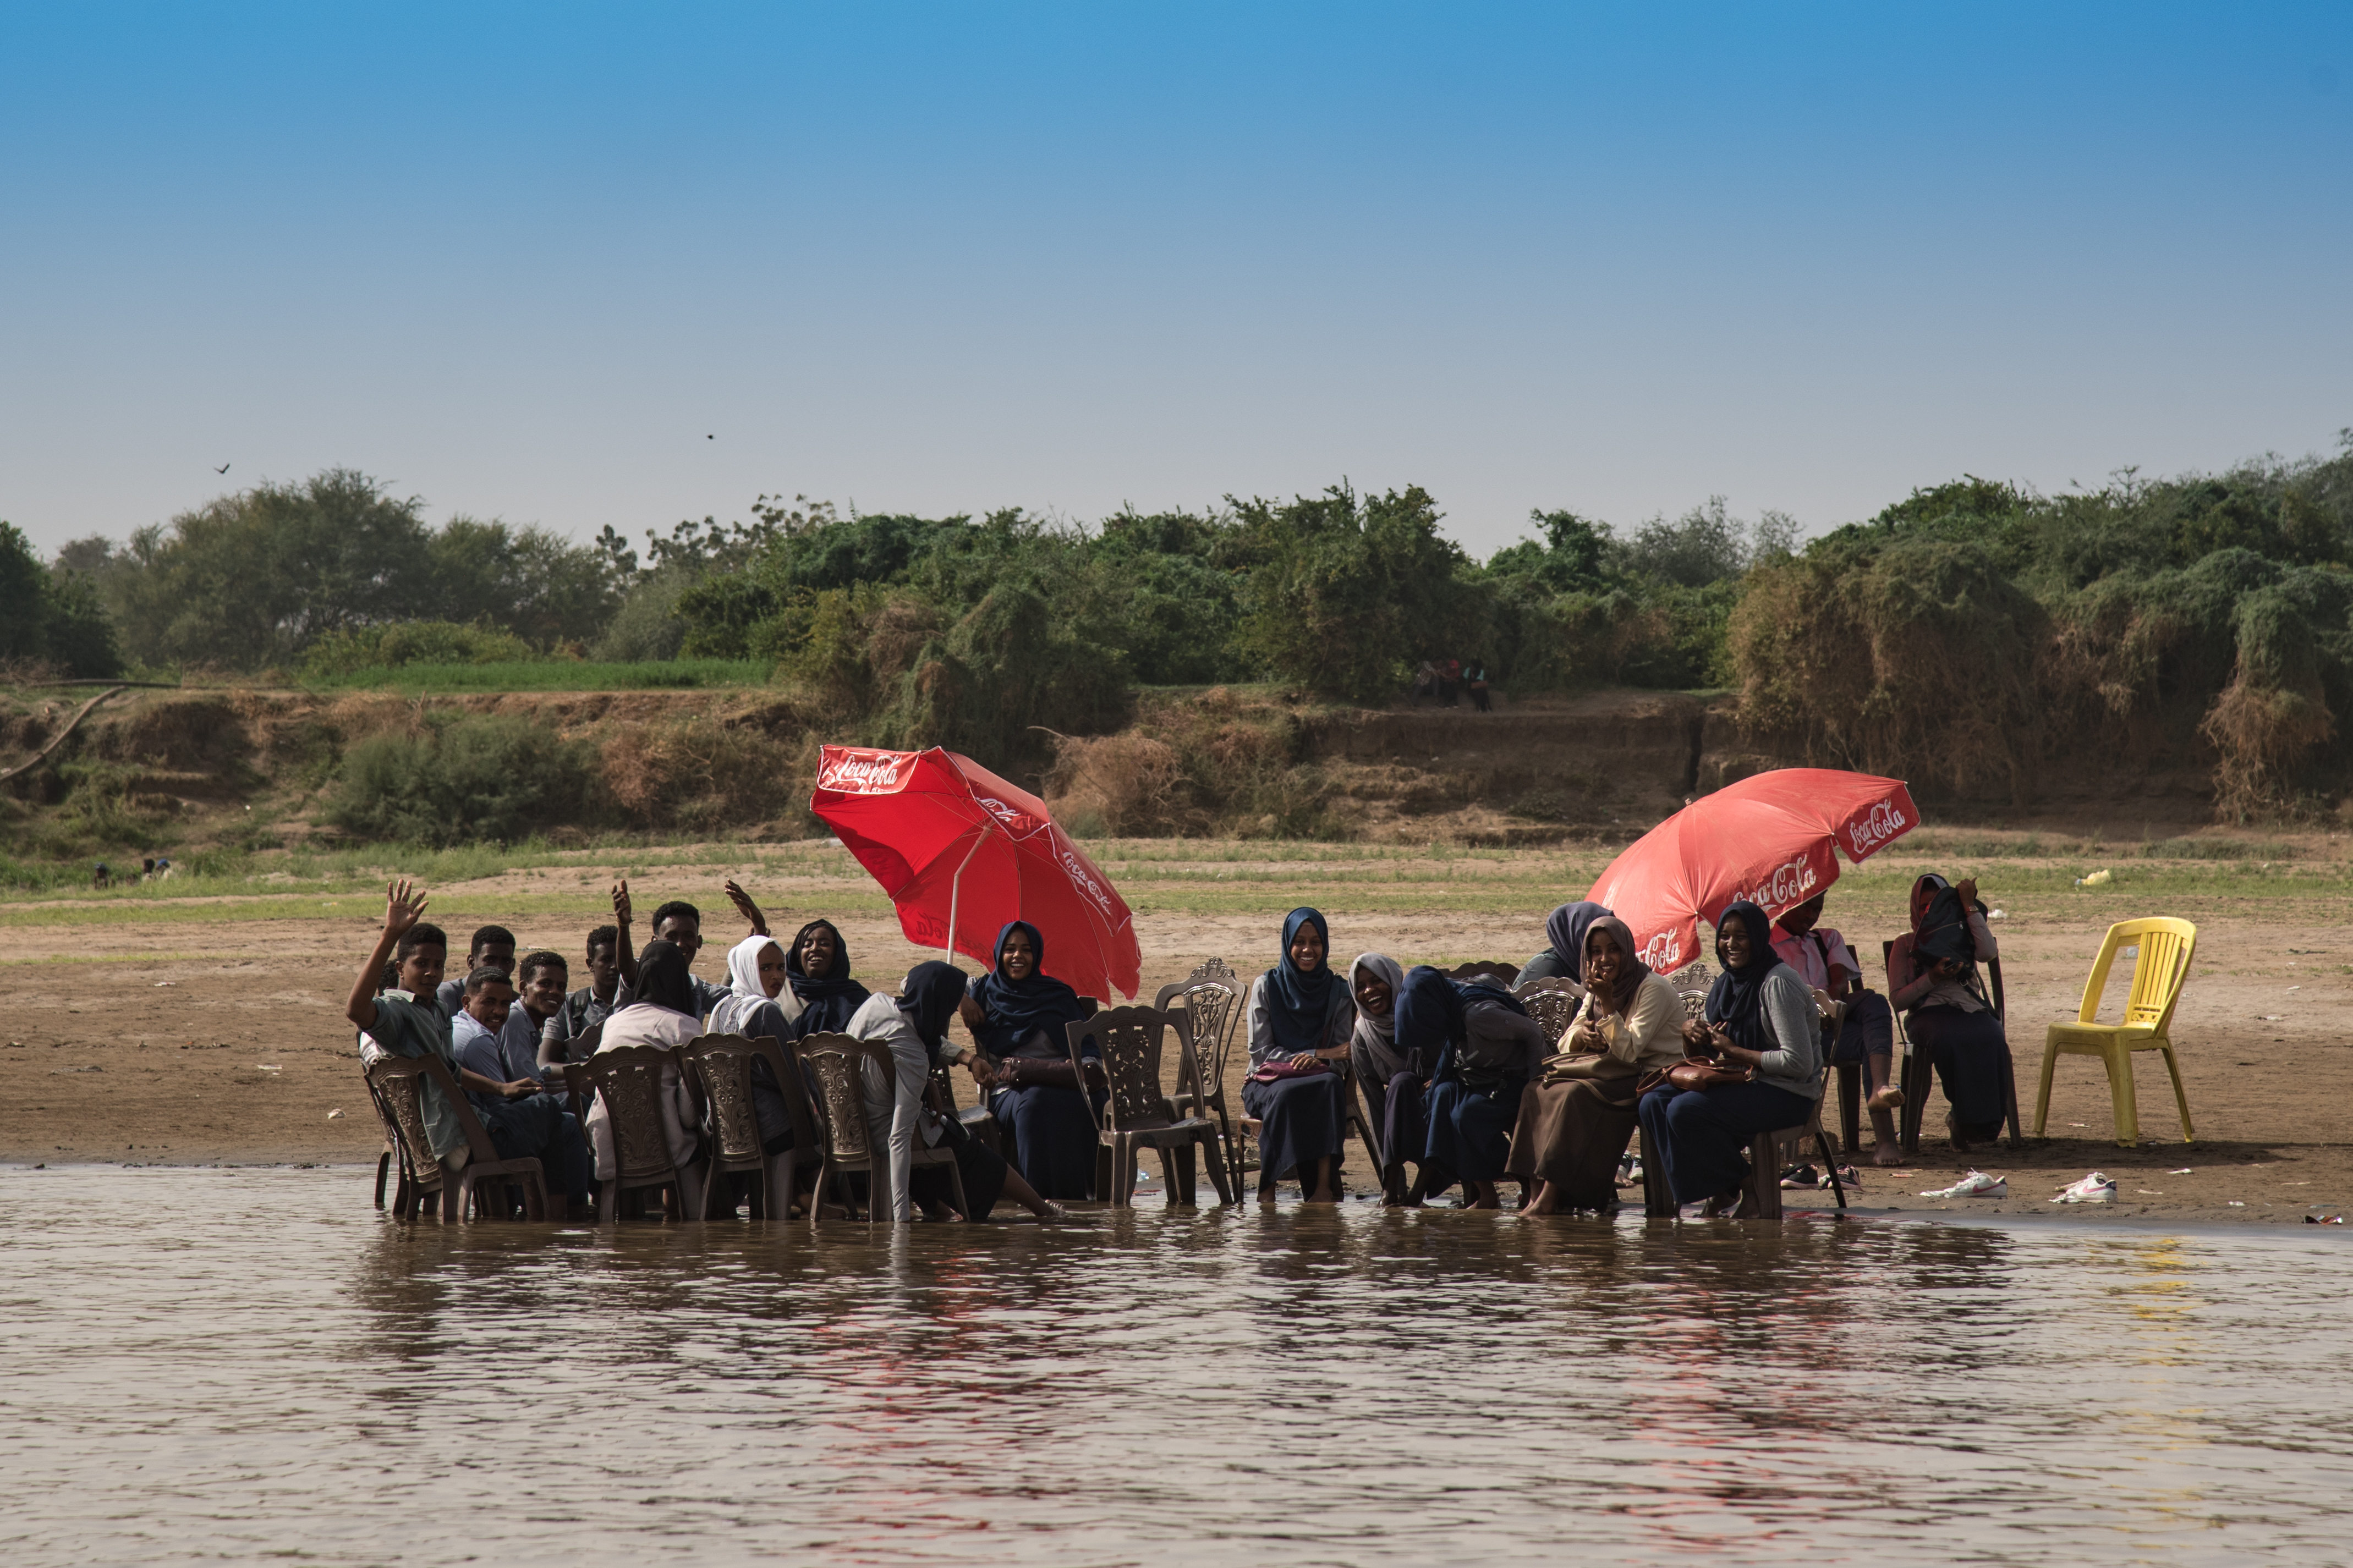 Teenagers socialise on the banks of the Nile in Khartoum (Sarah Marshall/PA)